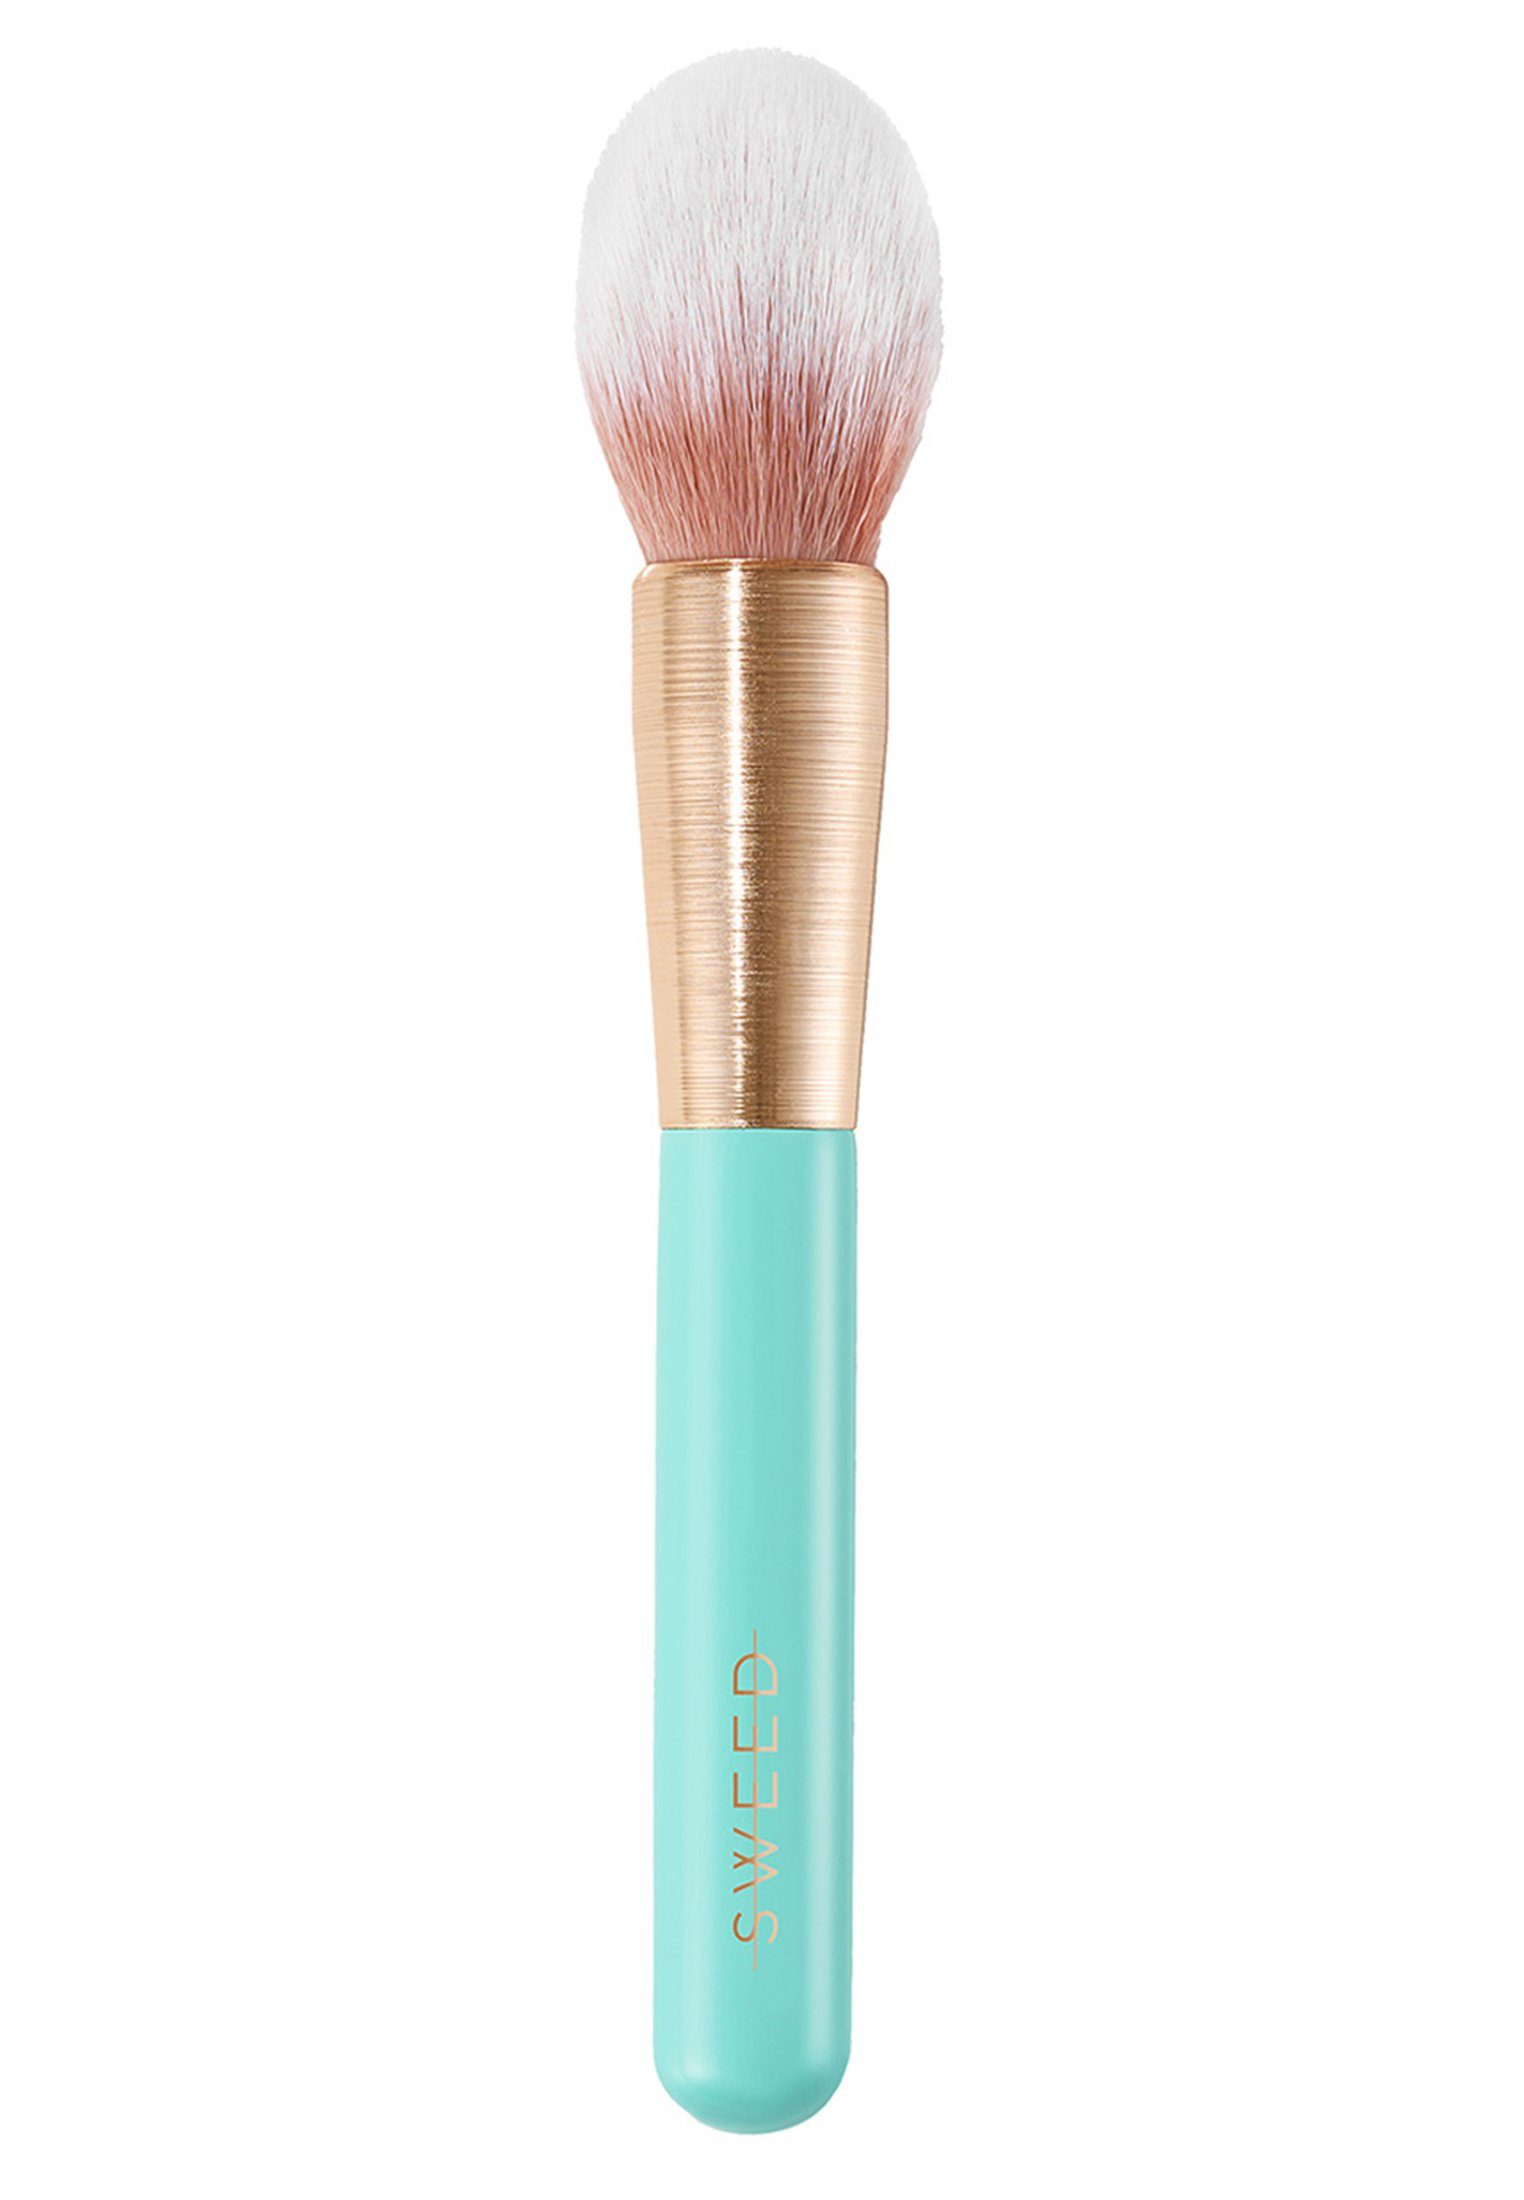 Sweed Puderpinsel 1 Sweed Powder Foundationpinsel Brush,